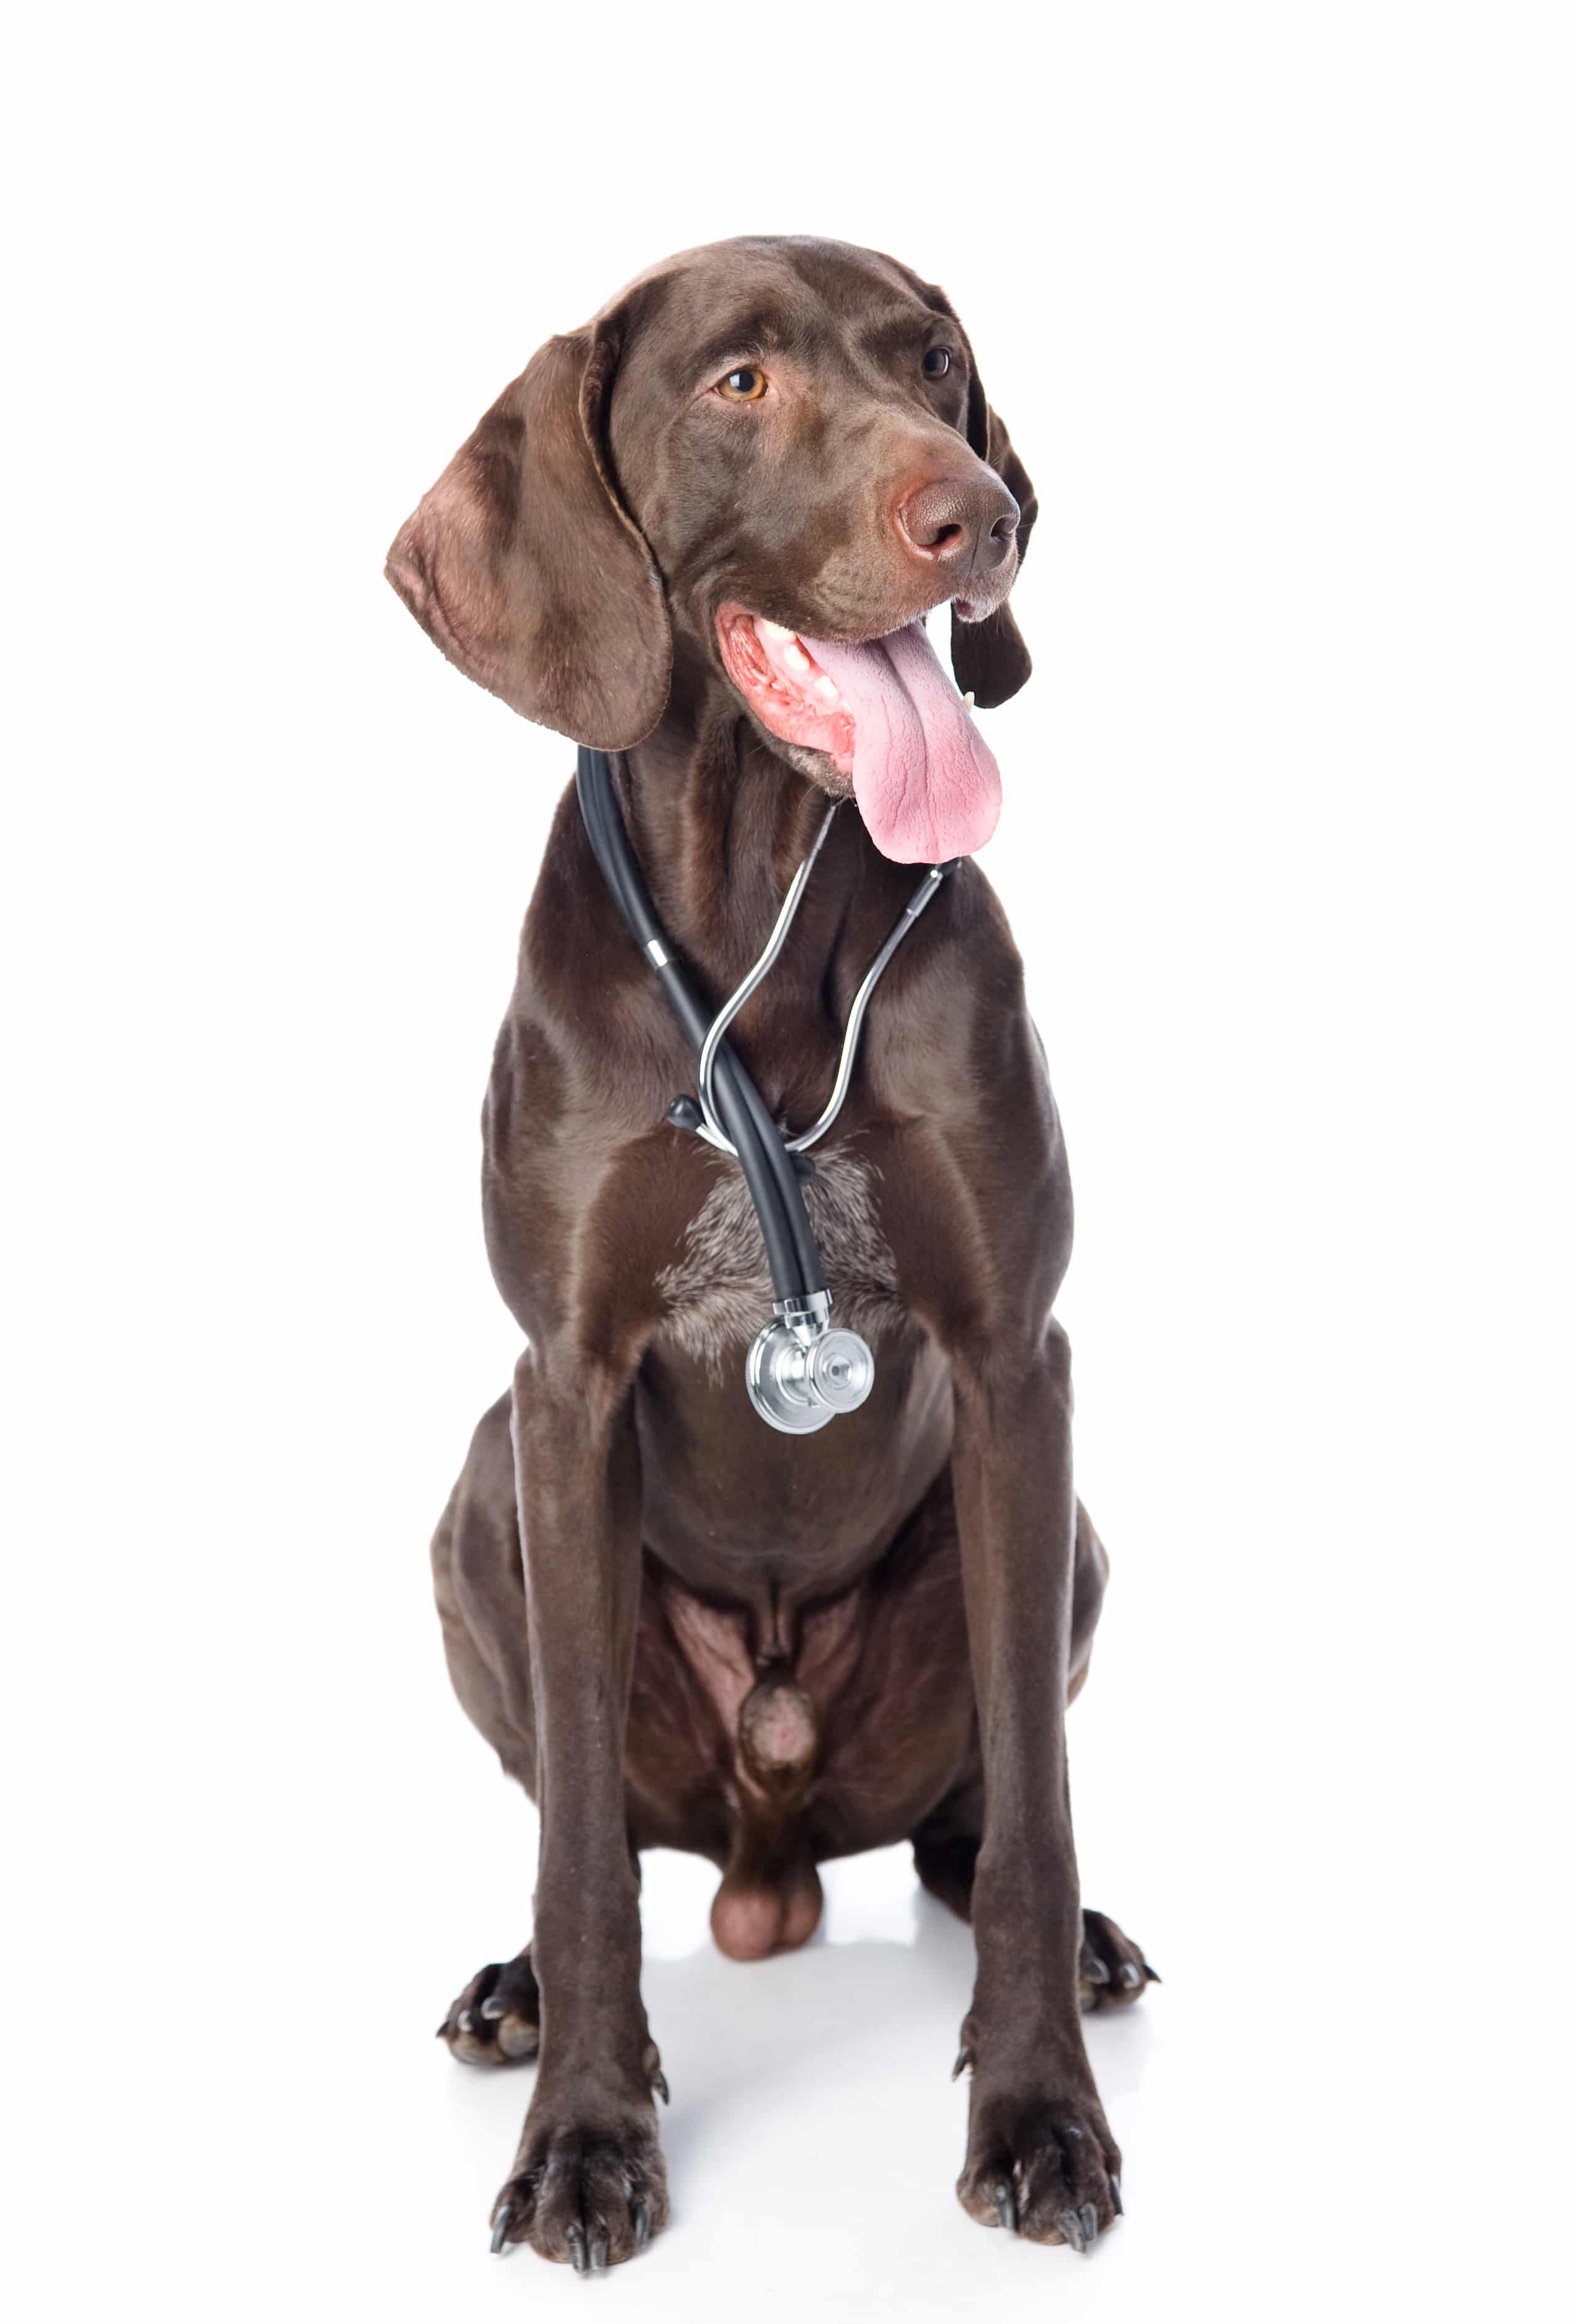 German Shorthaired Pointer with a stethoscope on his neck.